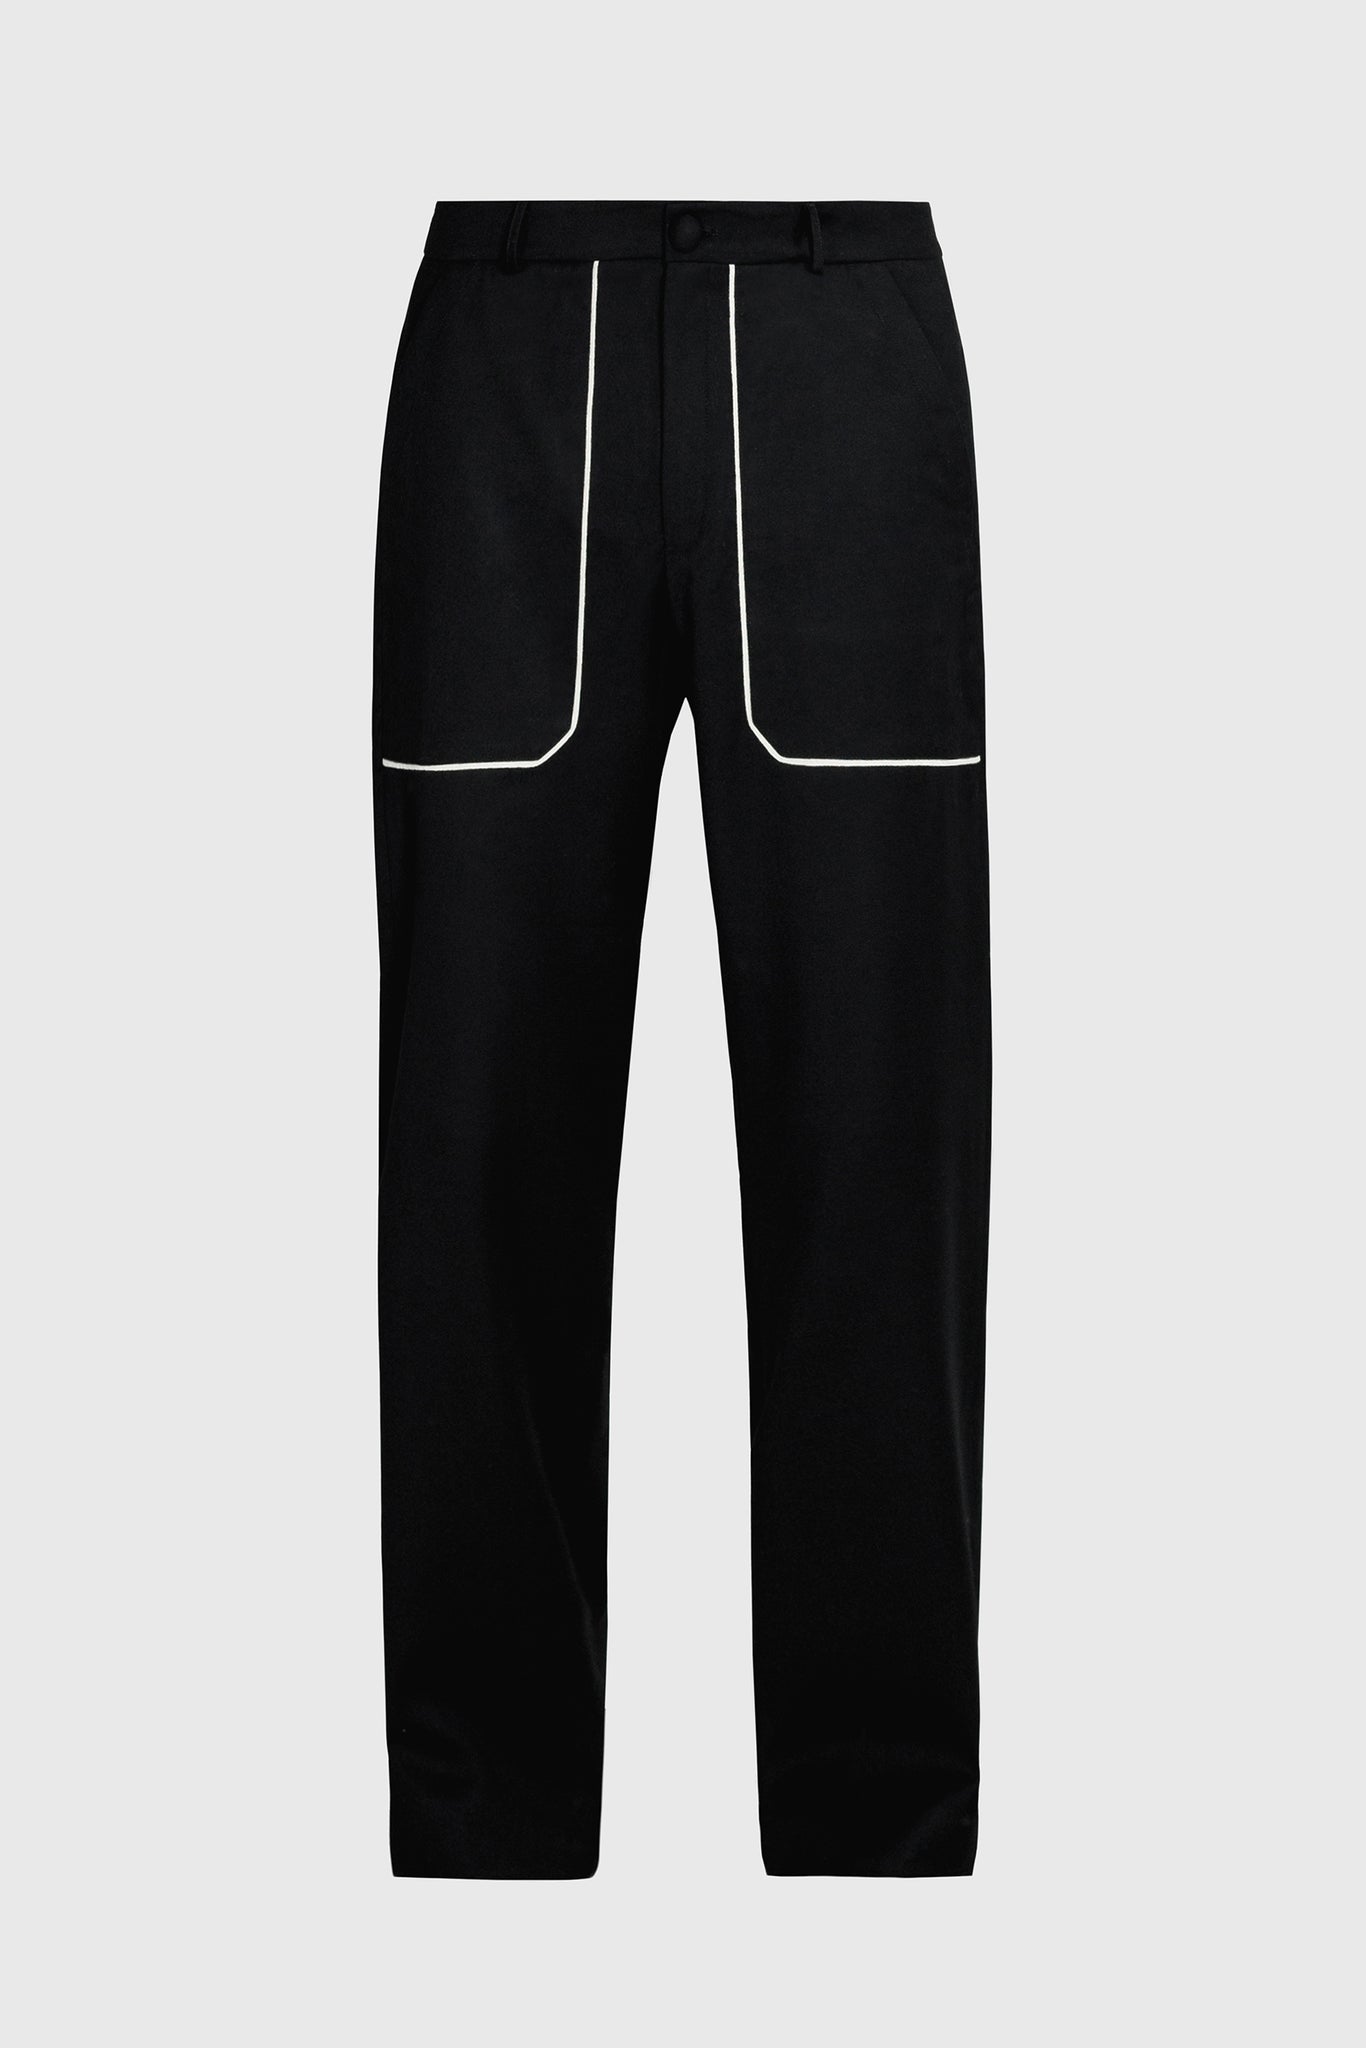 women's trousers, with geometric front pockets, underlined with white details, detailed waistline, large pockets, oversized straight fit, wool covered buttons, Instagram outfit of the day, all black color fashion, sophisticated style